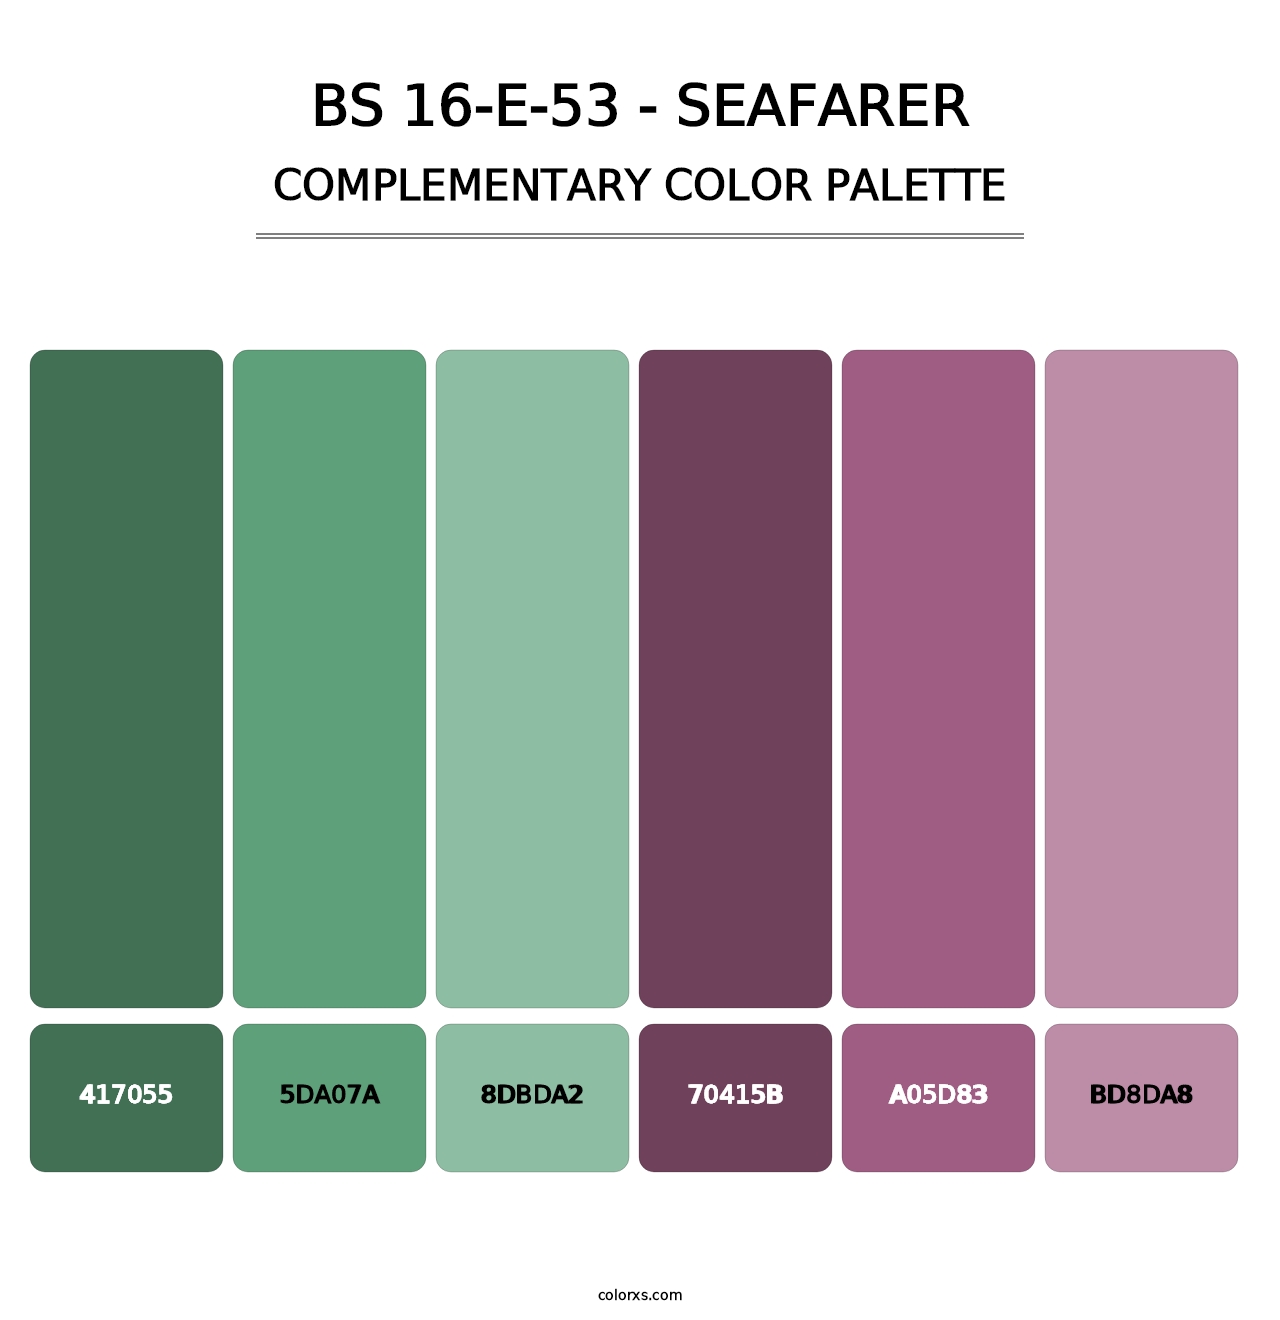 BS 16-E-53 - Seafarer - Complementary Color Palette